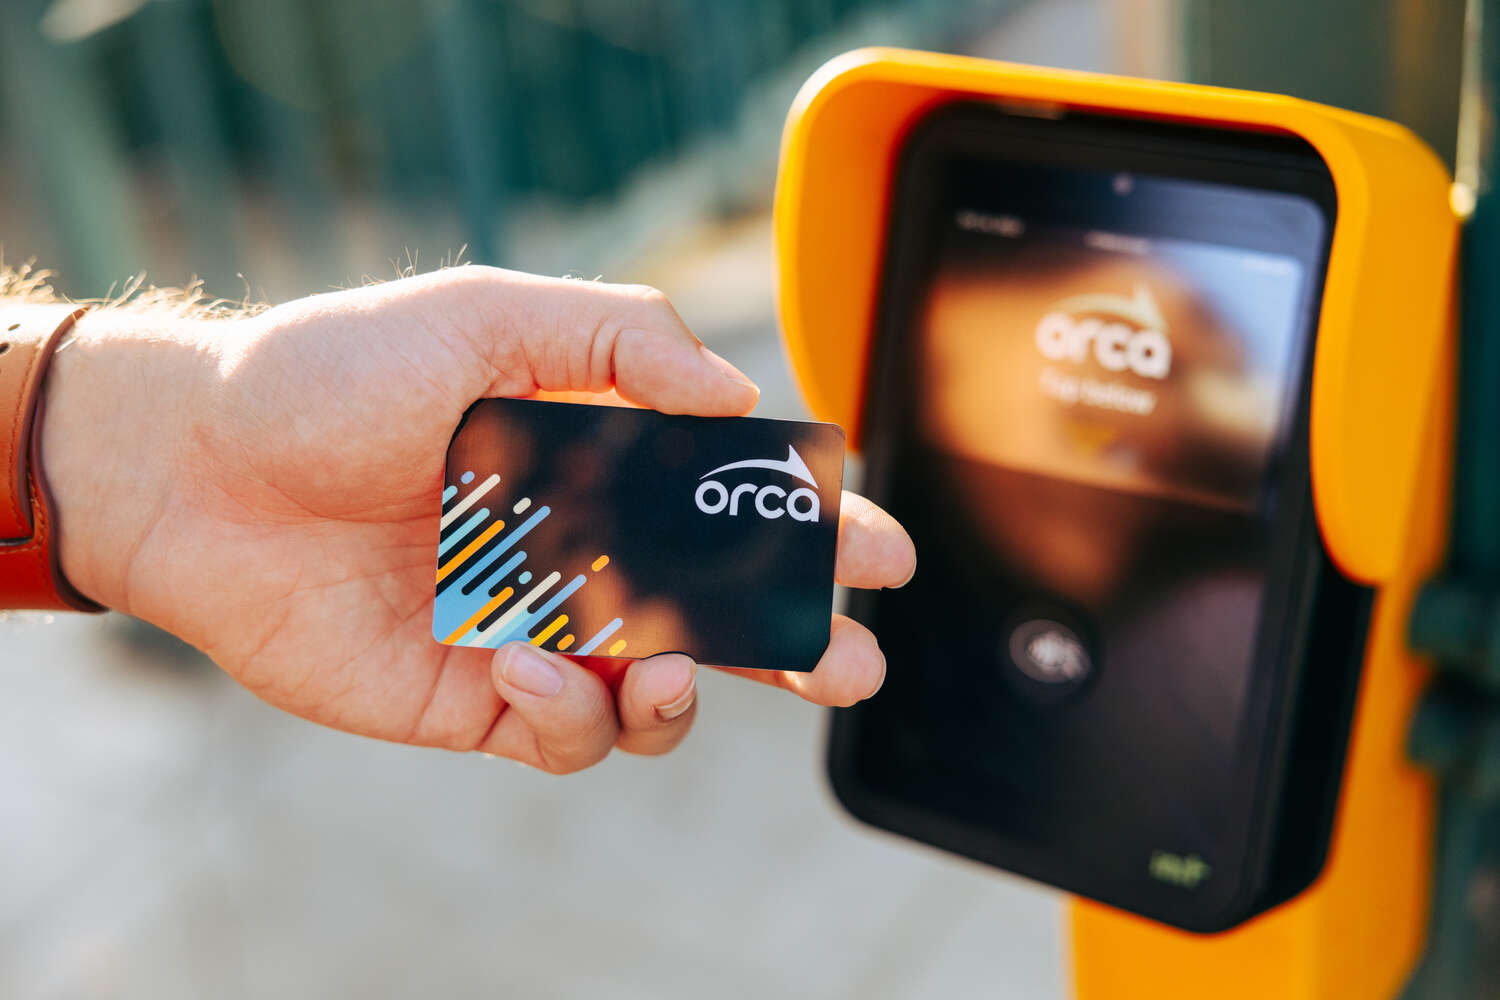 One Regional Card for All (ORCA) cards are accepted on most transit buses in the region and on Sounder, light rail, Seattle Streetcars, Washington State Ferries, and other transit options.